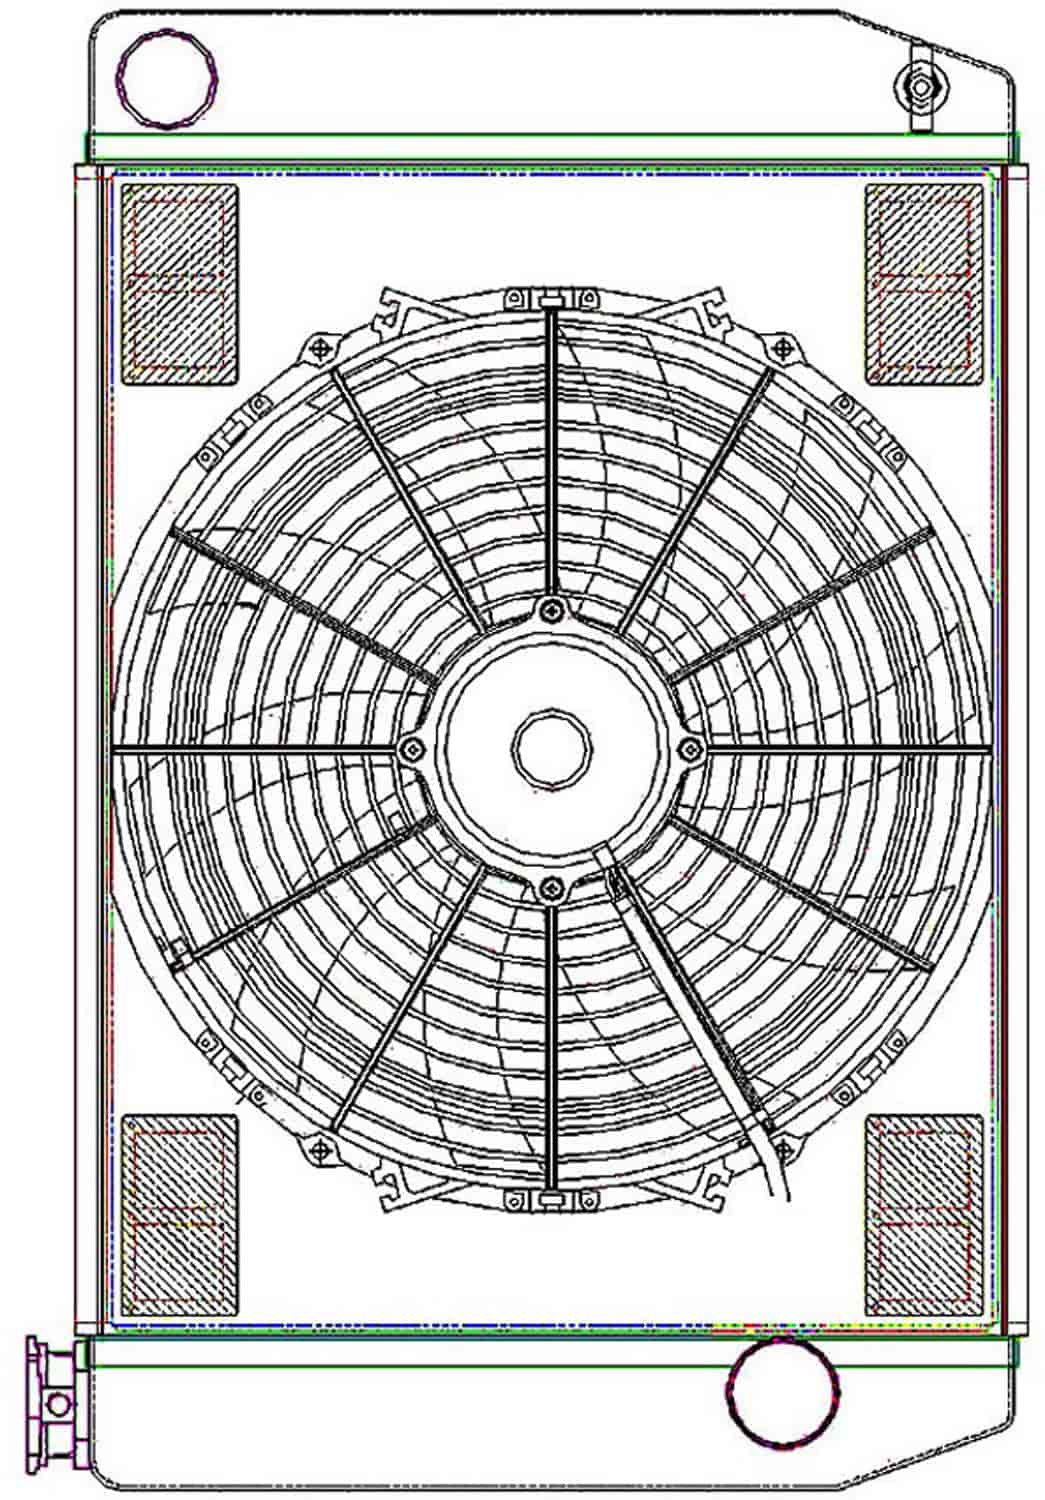 ClassicCool ComboUnit Universal Fit Radiator and Fan Single Pass Crossflow Design 24" x 15.50" with Straight Outlet